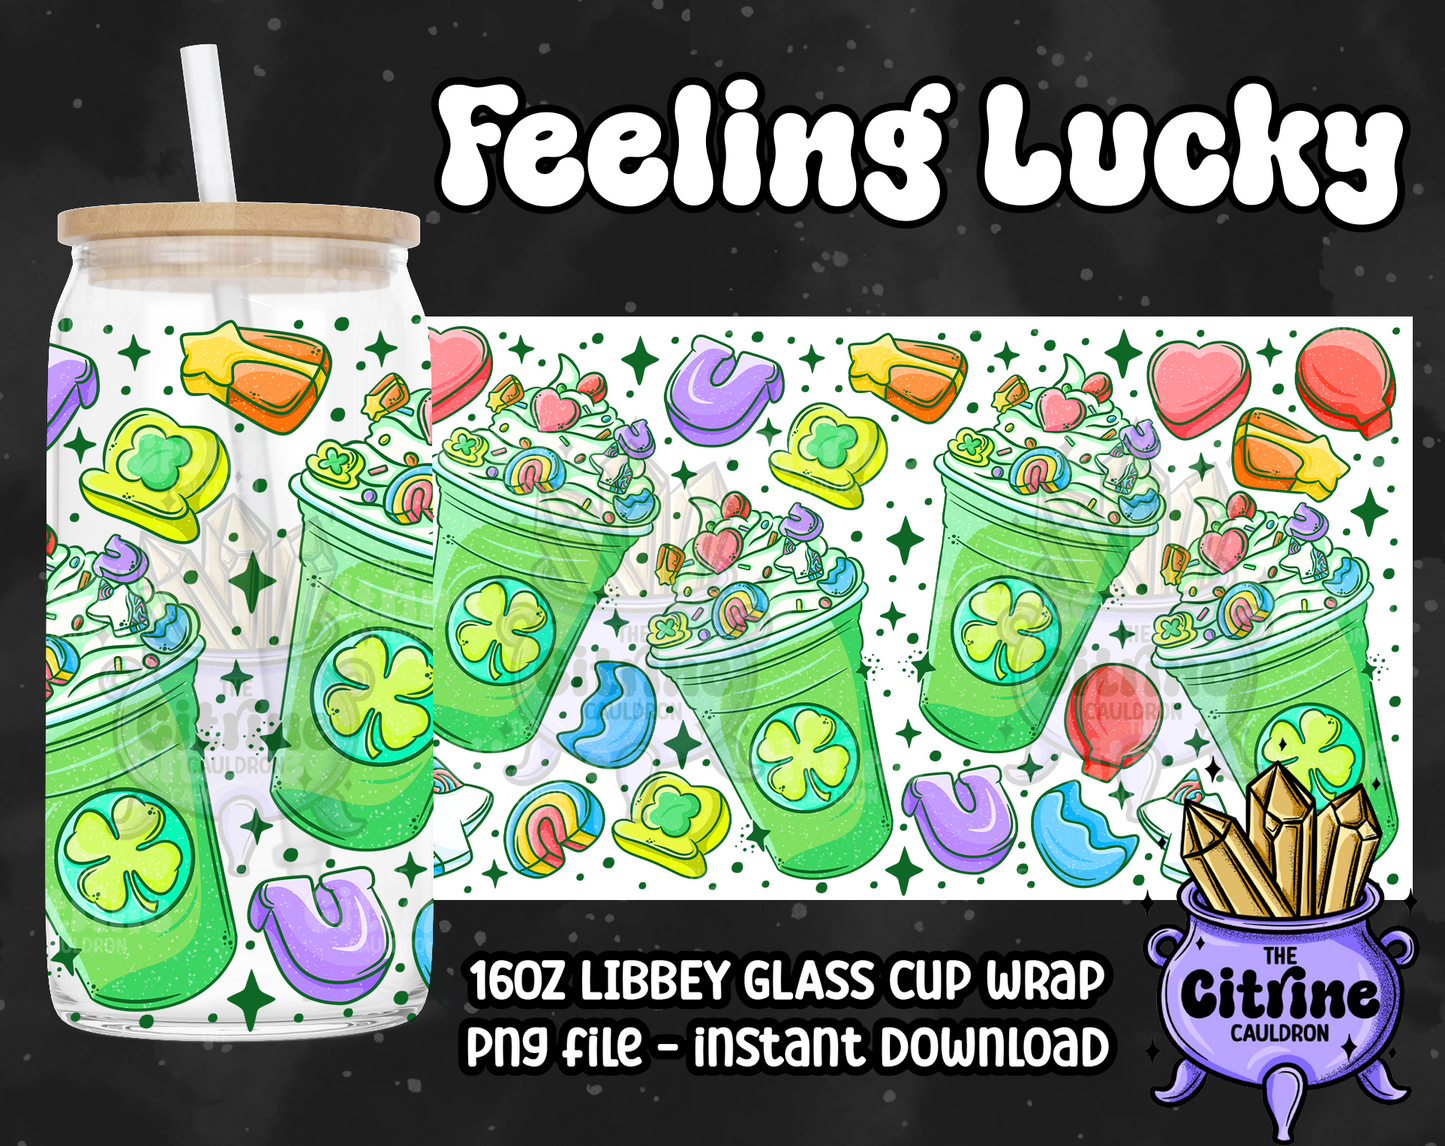 Feeling Lucky - PNG Wrap for Libbey 16oz Glass Can